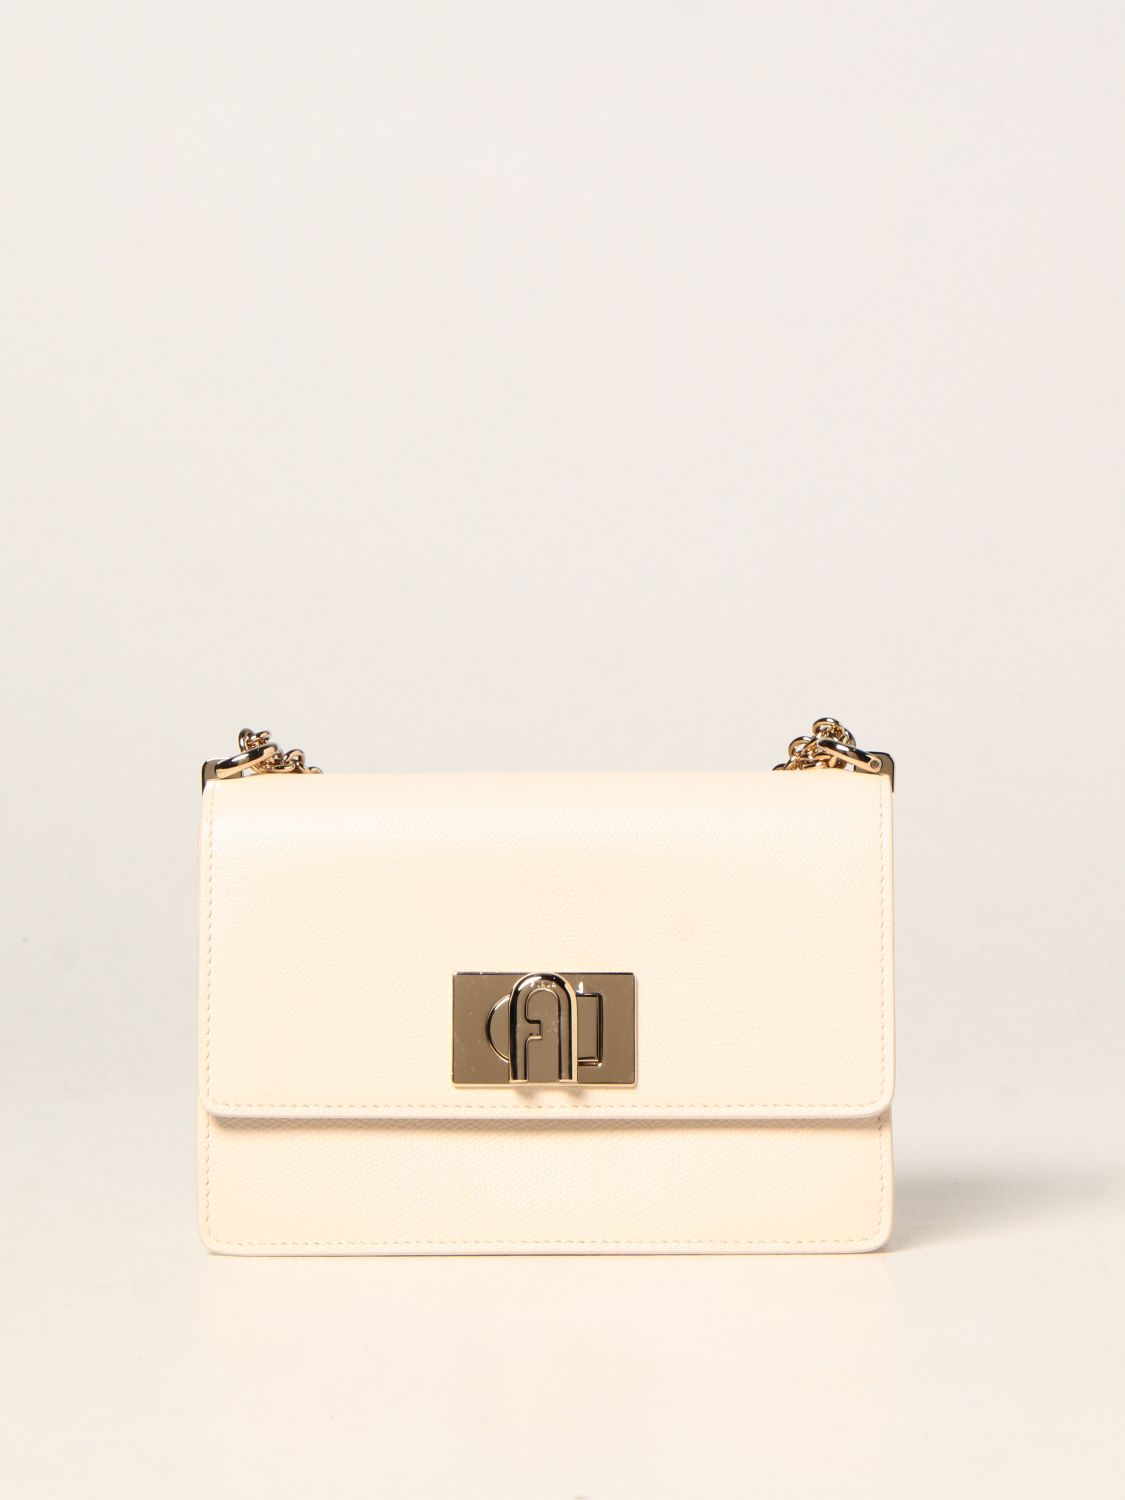 Furla 1927 Bandolier Bag In Grained Leather In Yellow Cream | ModeSens